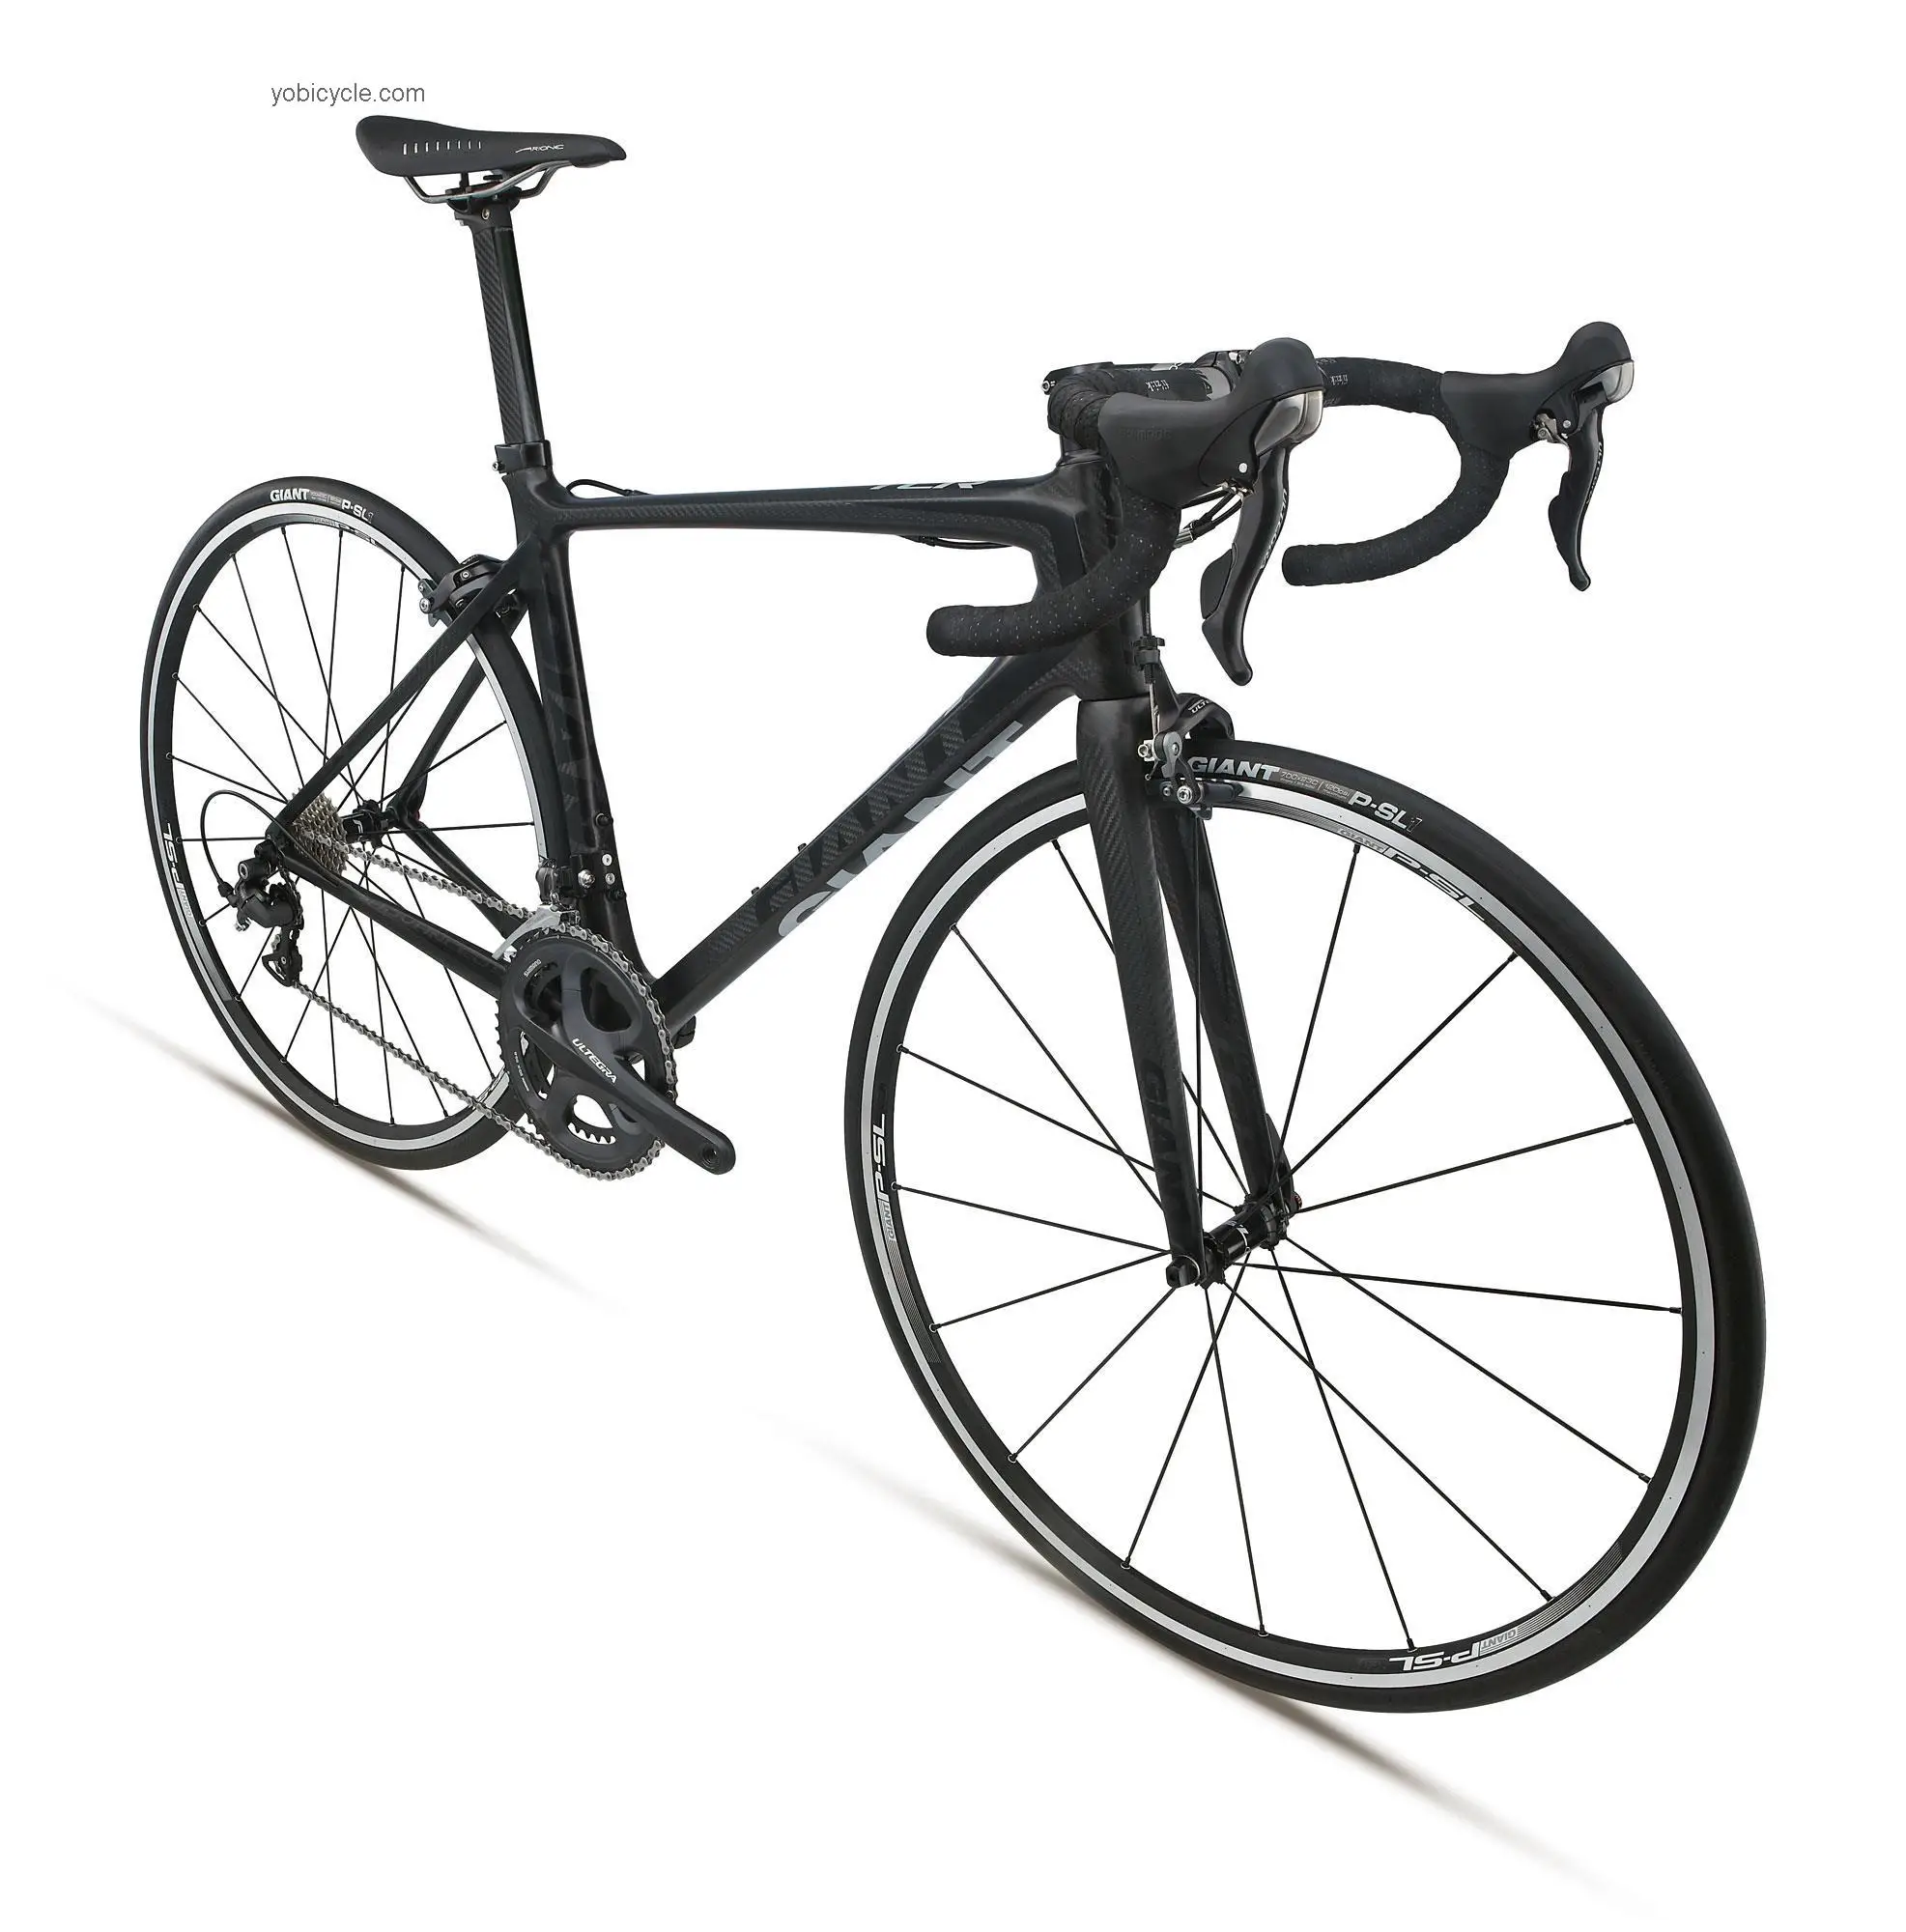 Giant TCR Advanced SL 3 Double competitors and comparison tool online specs and performance